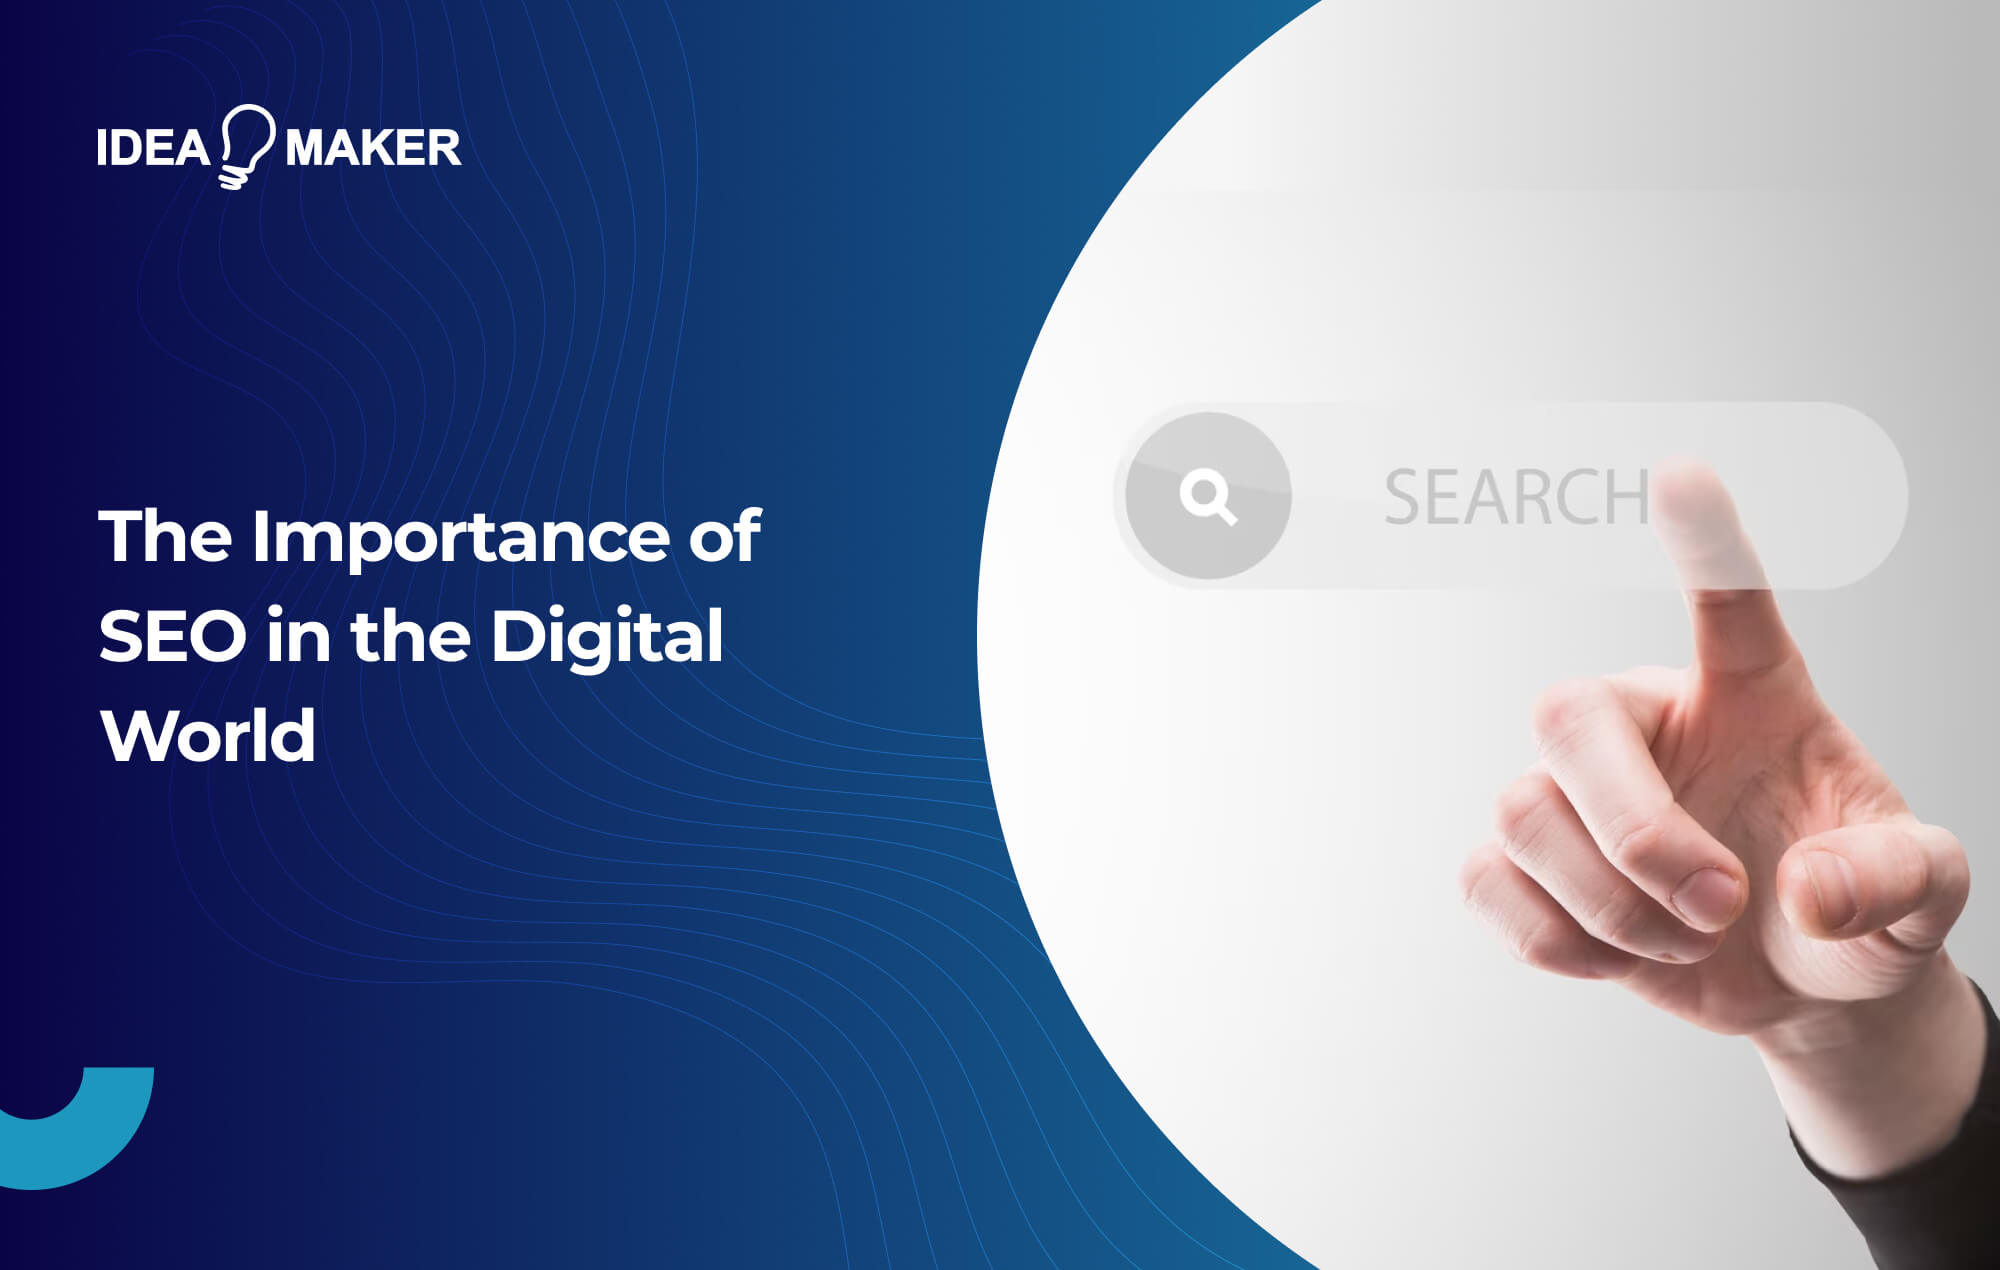 Ideamaker - The Importance of SEO in the Digital World